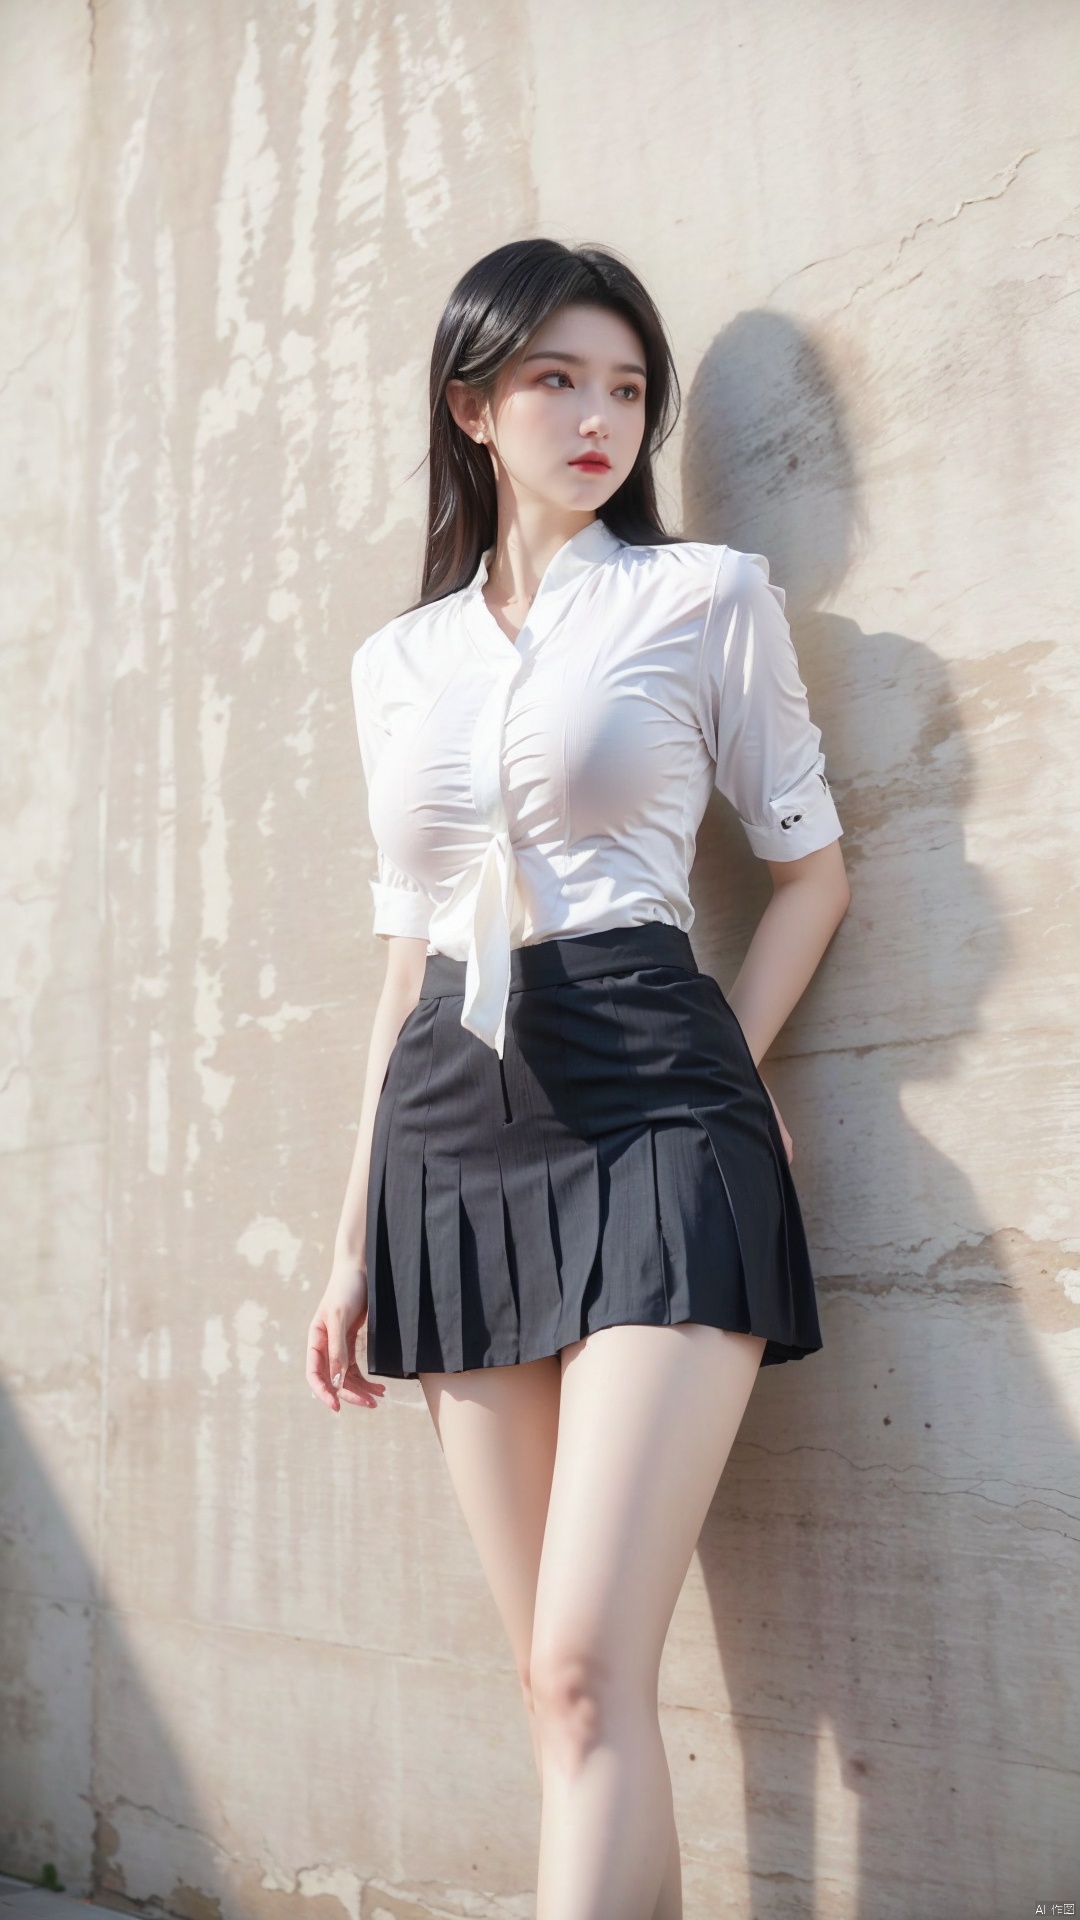  Best quality,masterpiece, 1girl,business shirt, (huge breasts:1.5)(Tie), (Exposed thighs:1.3), (mini skirt:1.3), (pleated skirt:1.3),1 girl,(The background is white wall:1.3),(big breasts:1.3),(huge breasts:1.3),Clothes Chinese landscape painting hanging on the wall